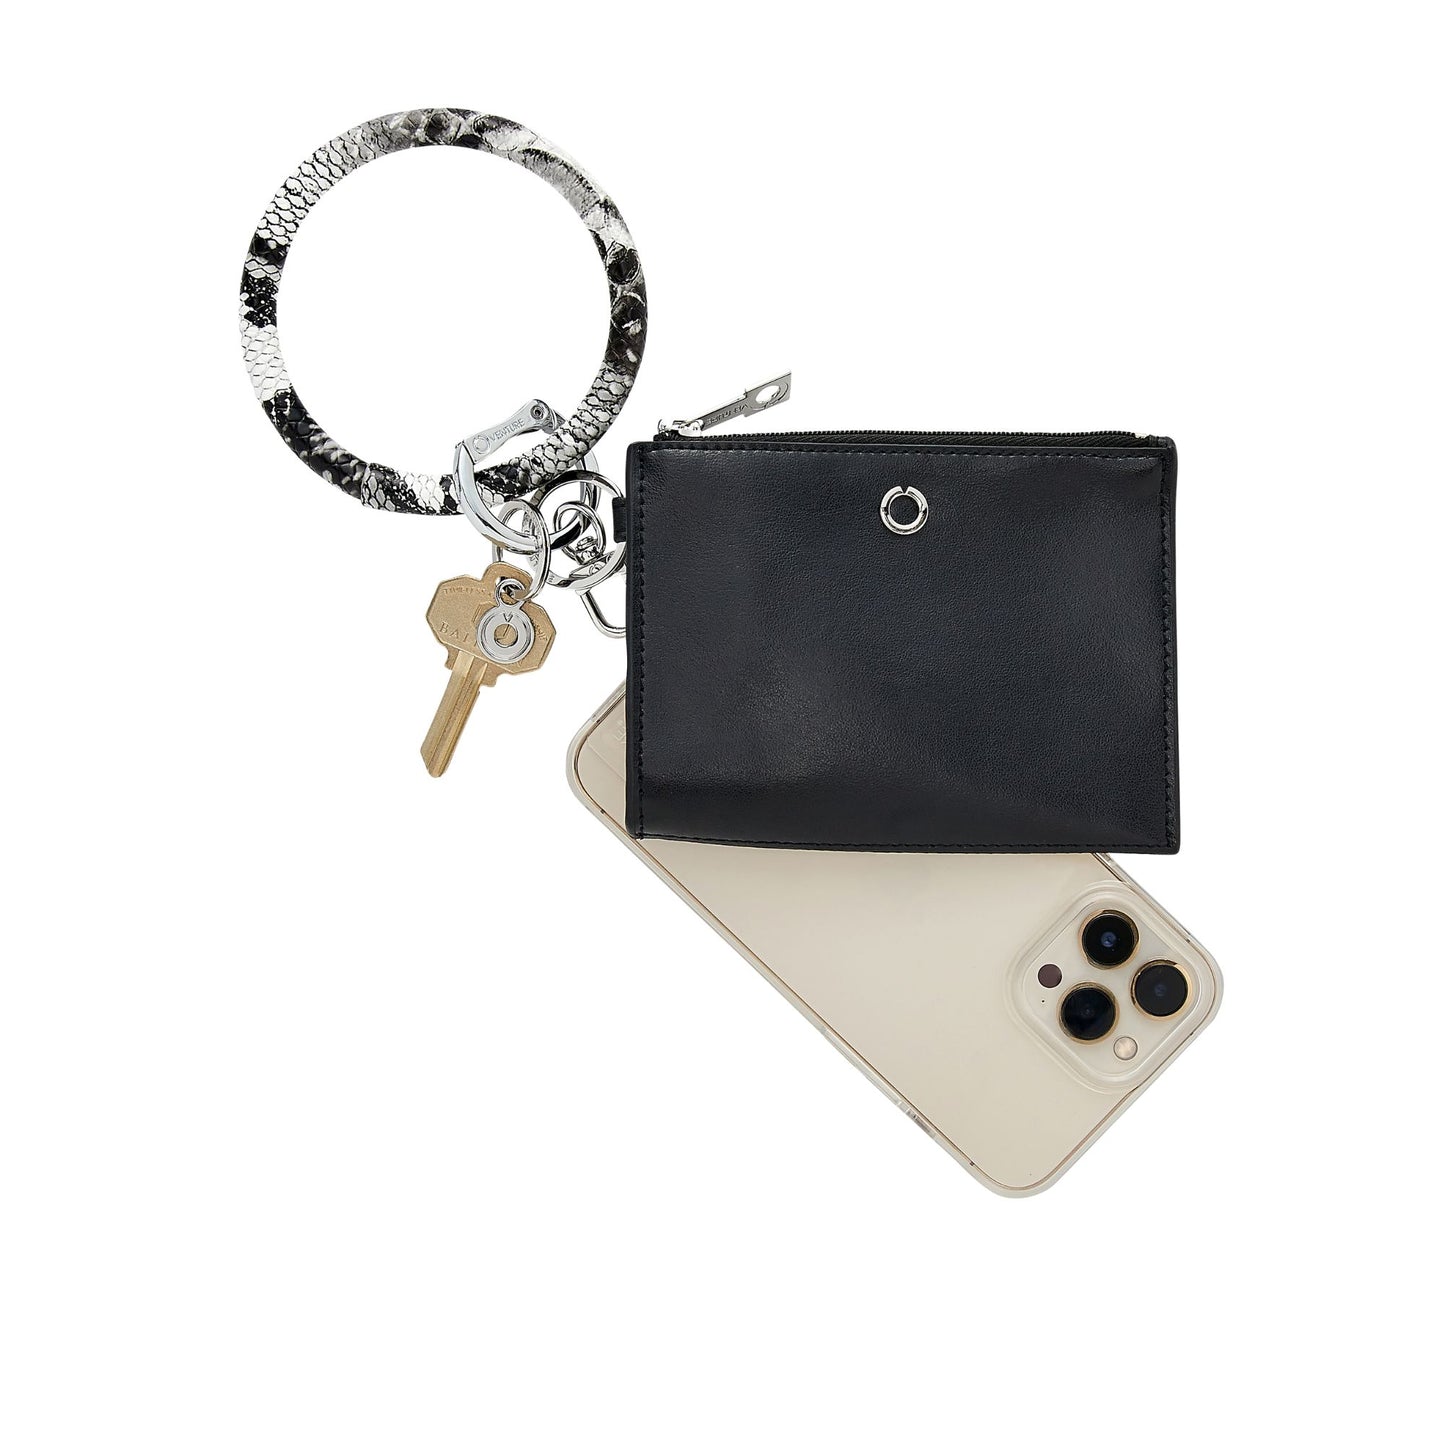 Leather Big O Key Ring in Tuxedo Snakeskin, Ossential wallet in back in black and phone hook me up with phone and keys attached